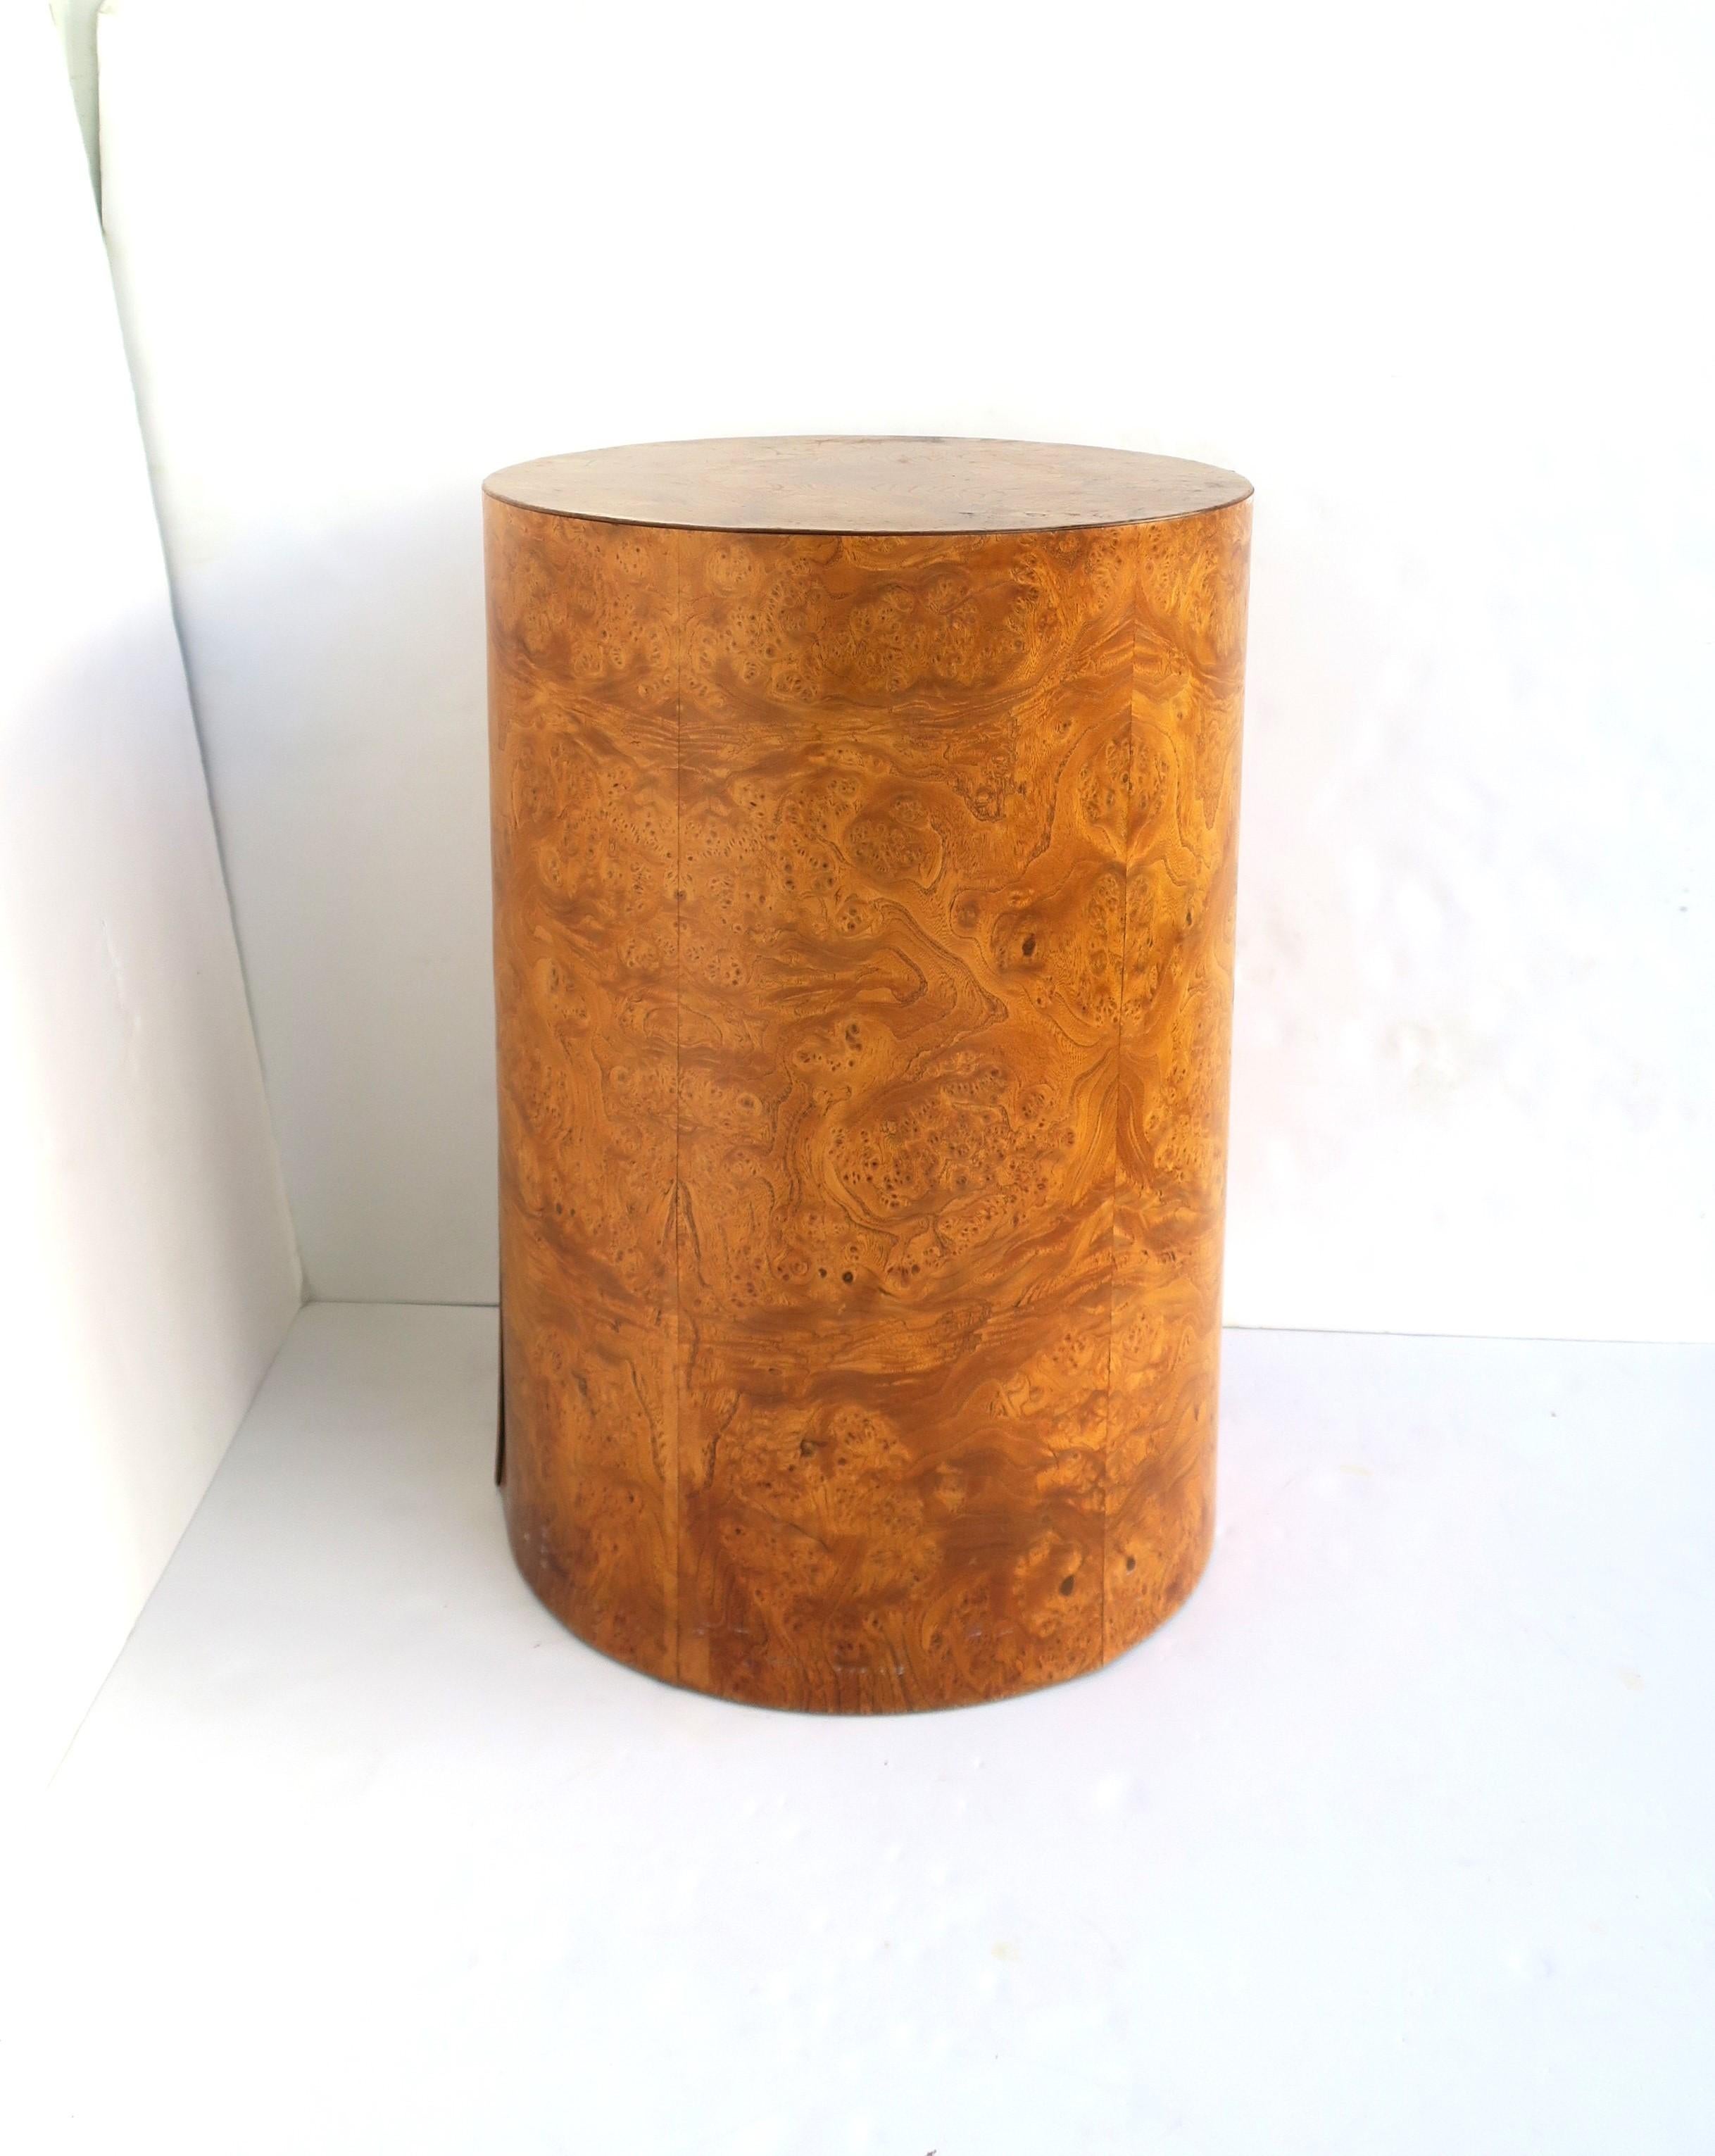 A solid and rich burl pedestal table or column, after designer Milo Baughman, in the modern style, circa mid to late-20th century, 1960s, 1970s. Piece is substantial, covered in a burl wood veneer. A great as a side/drinks table or for sculpture,